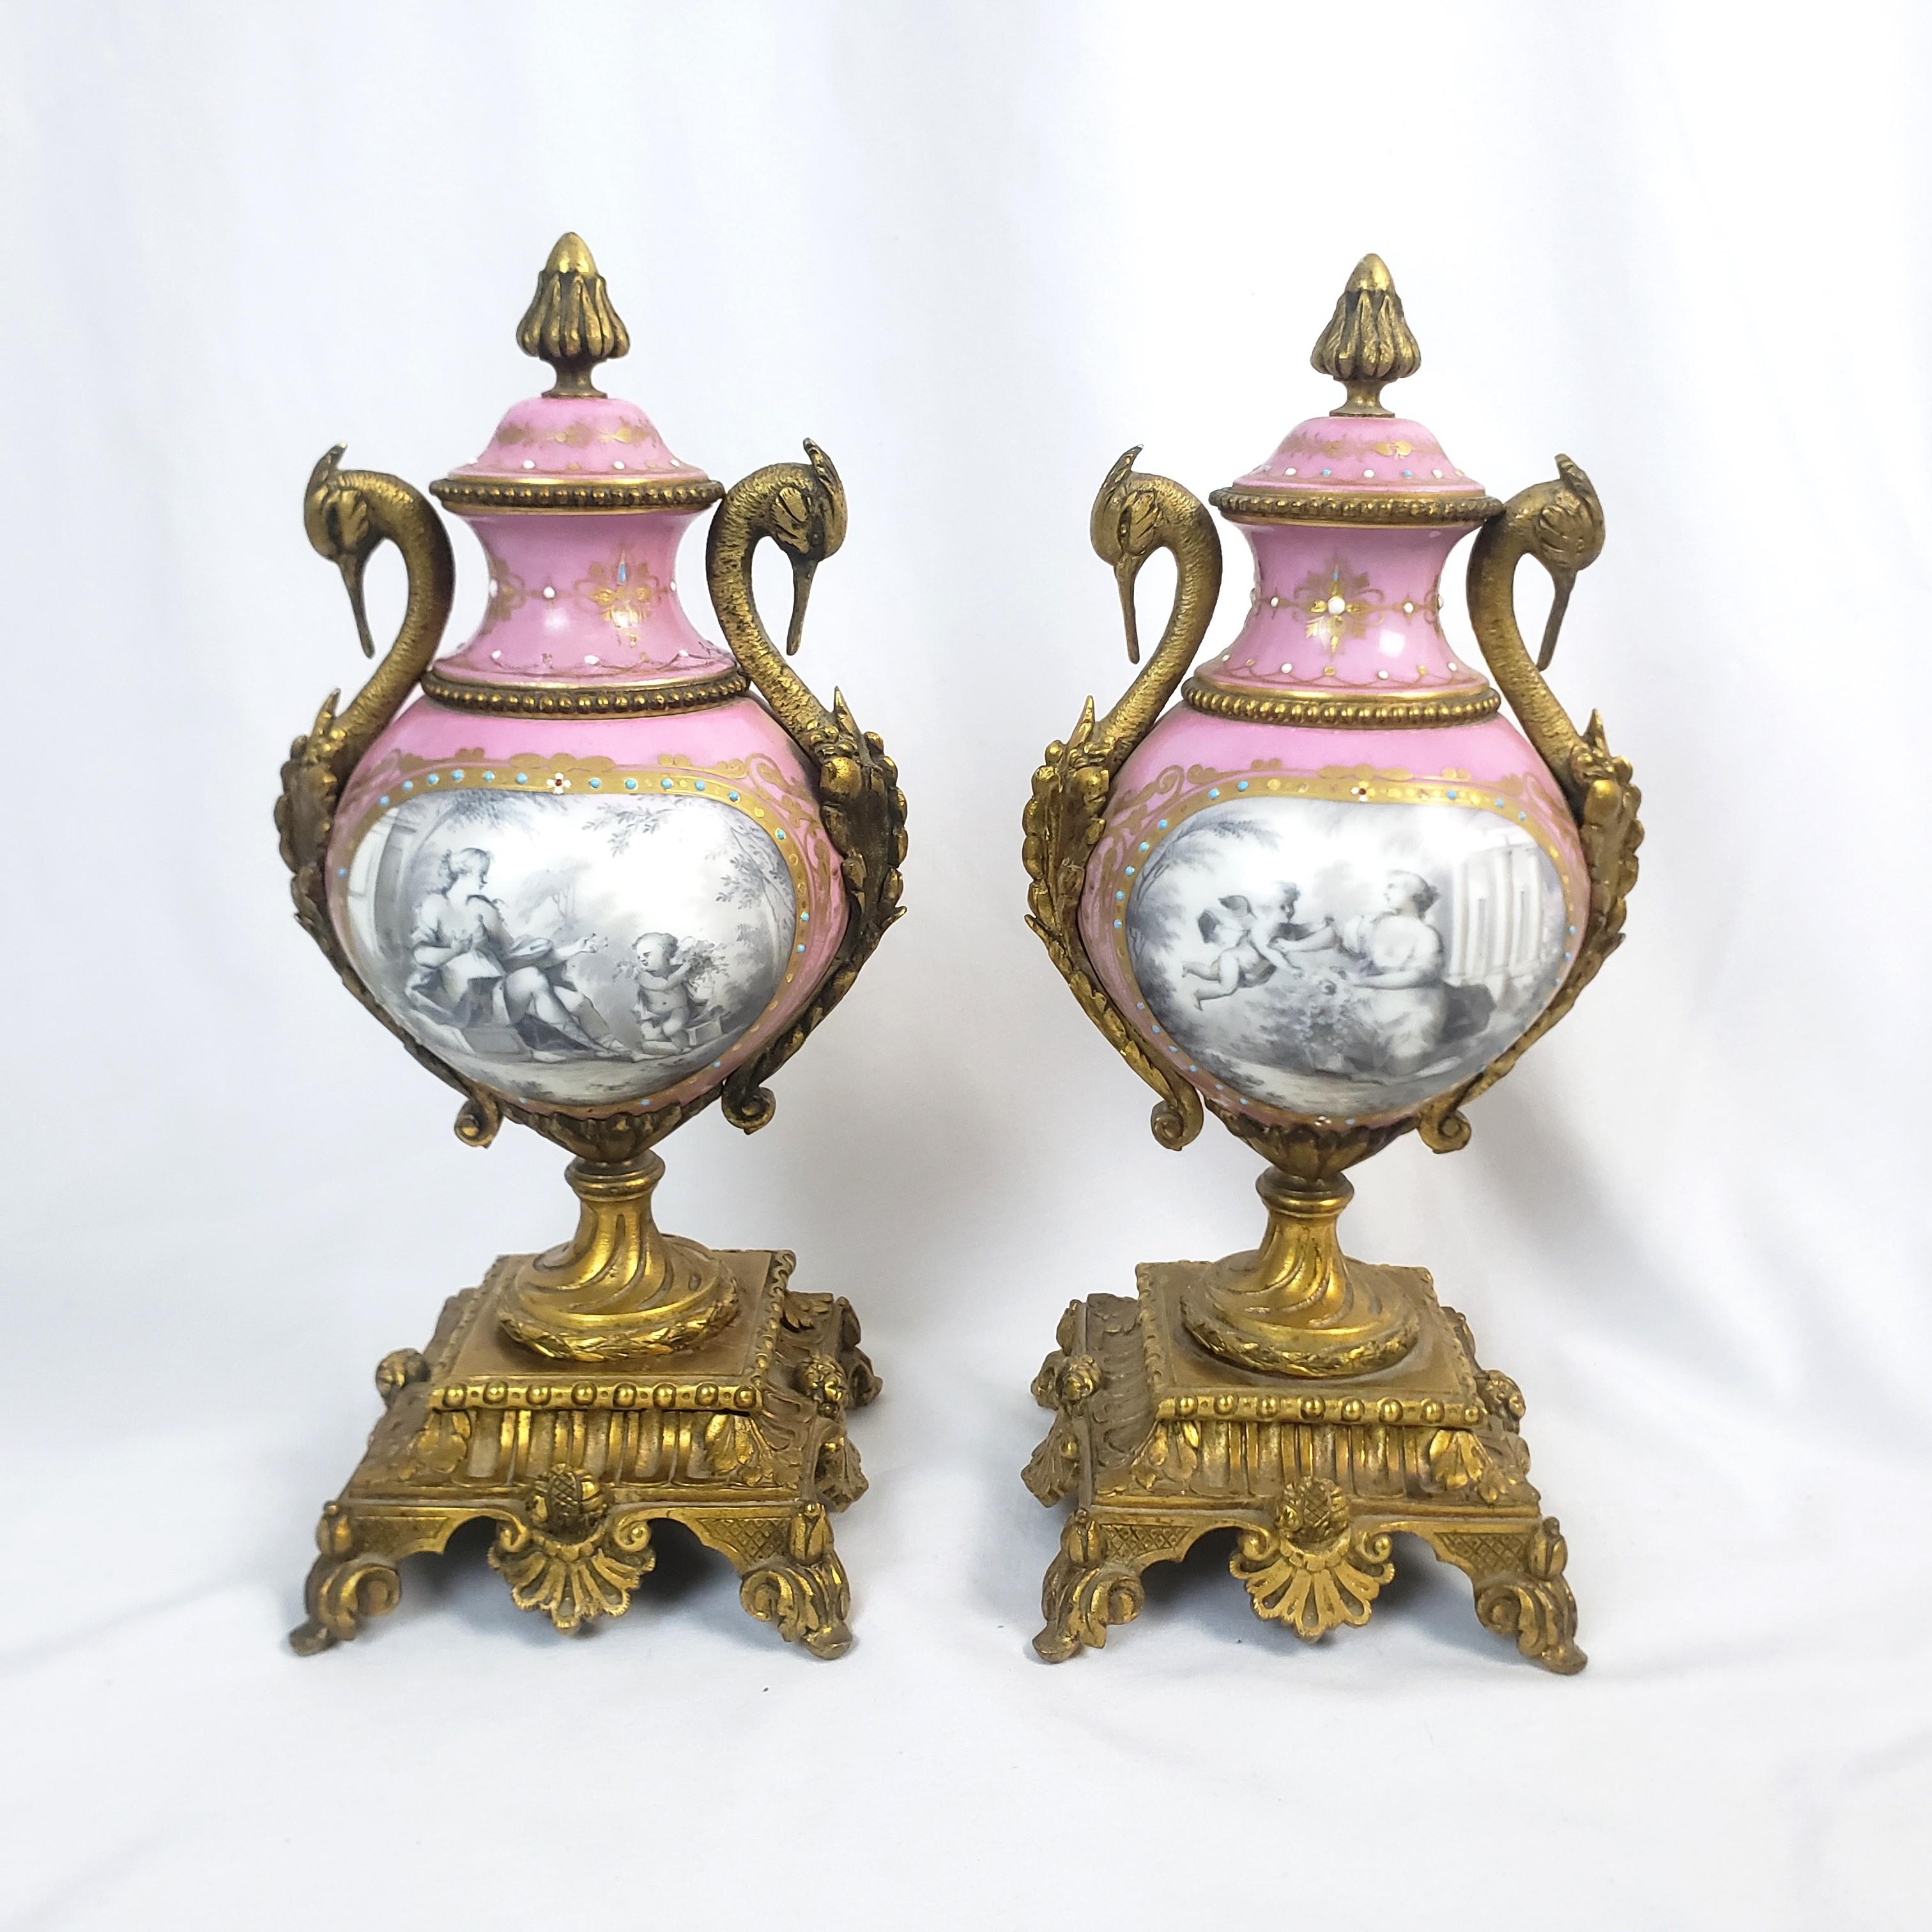 This pair of antique garnitures are unsigne, but presumed to have originated from France and date to approximately 1875 and done in the Sevres style. The garnitures are done in porcelain with ornate gilt bronze finial, stylized figural swan handles